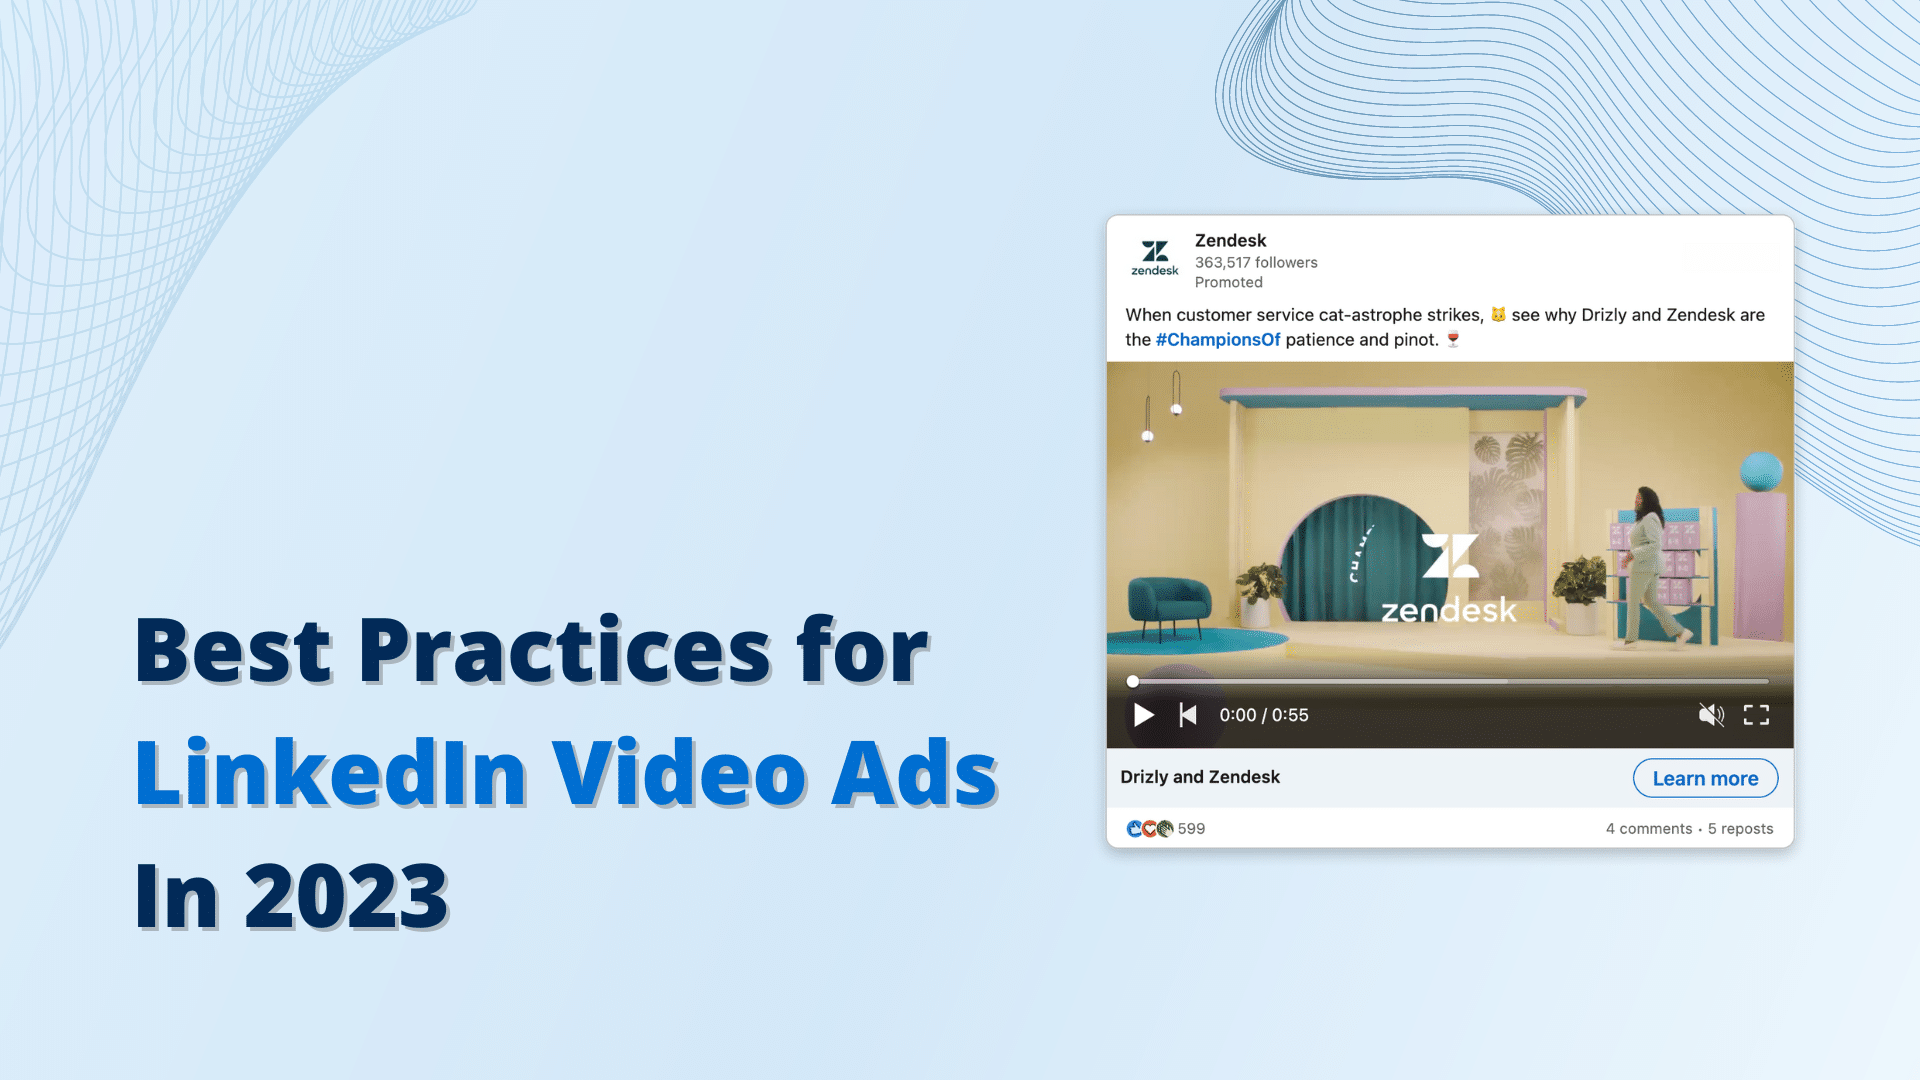 Best Practices for LinkedIn Video Ads In 2023